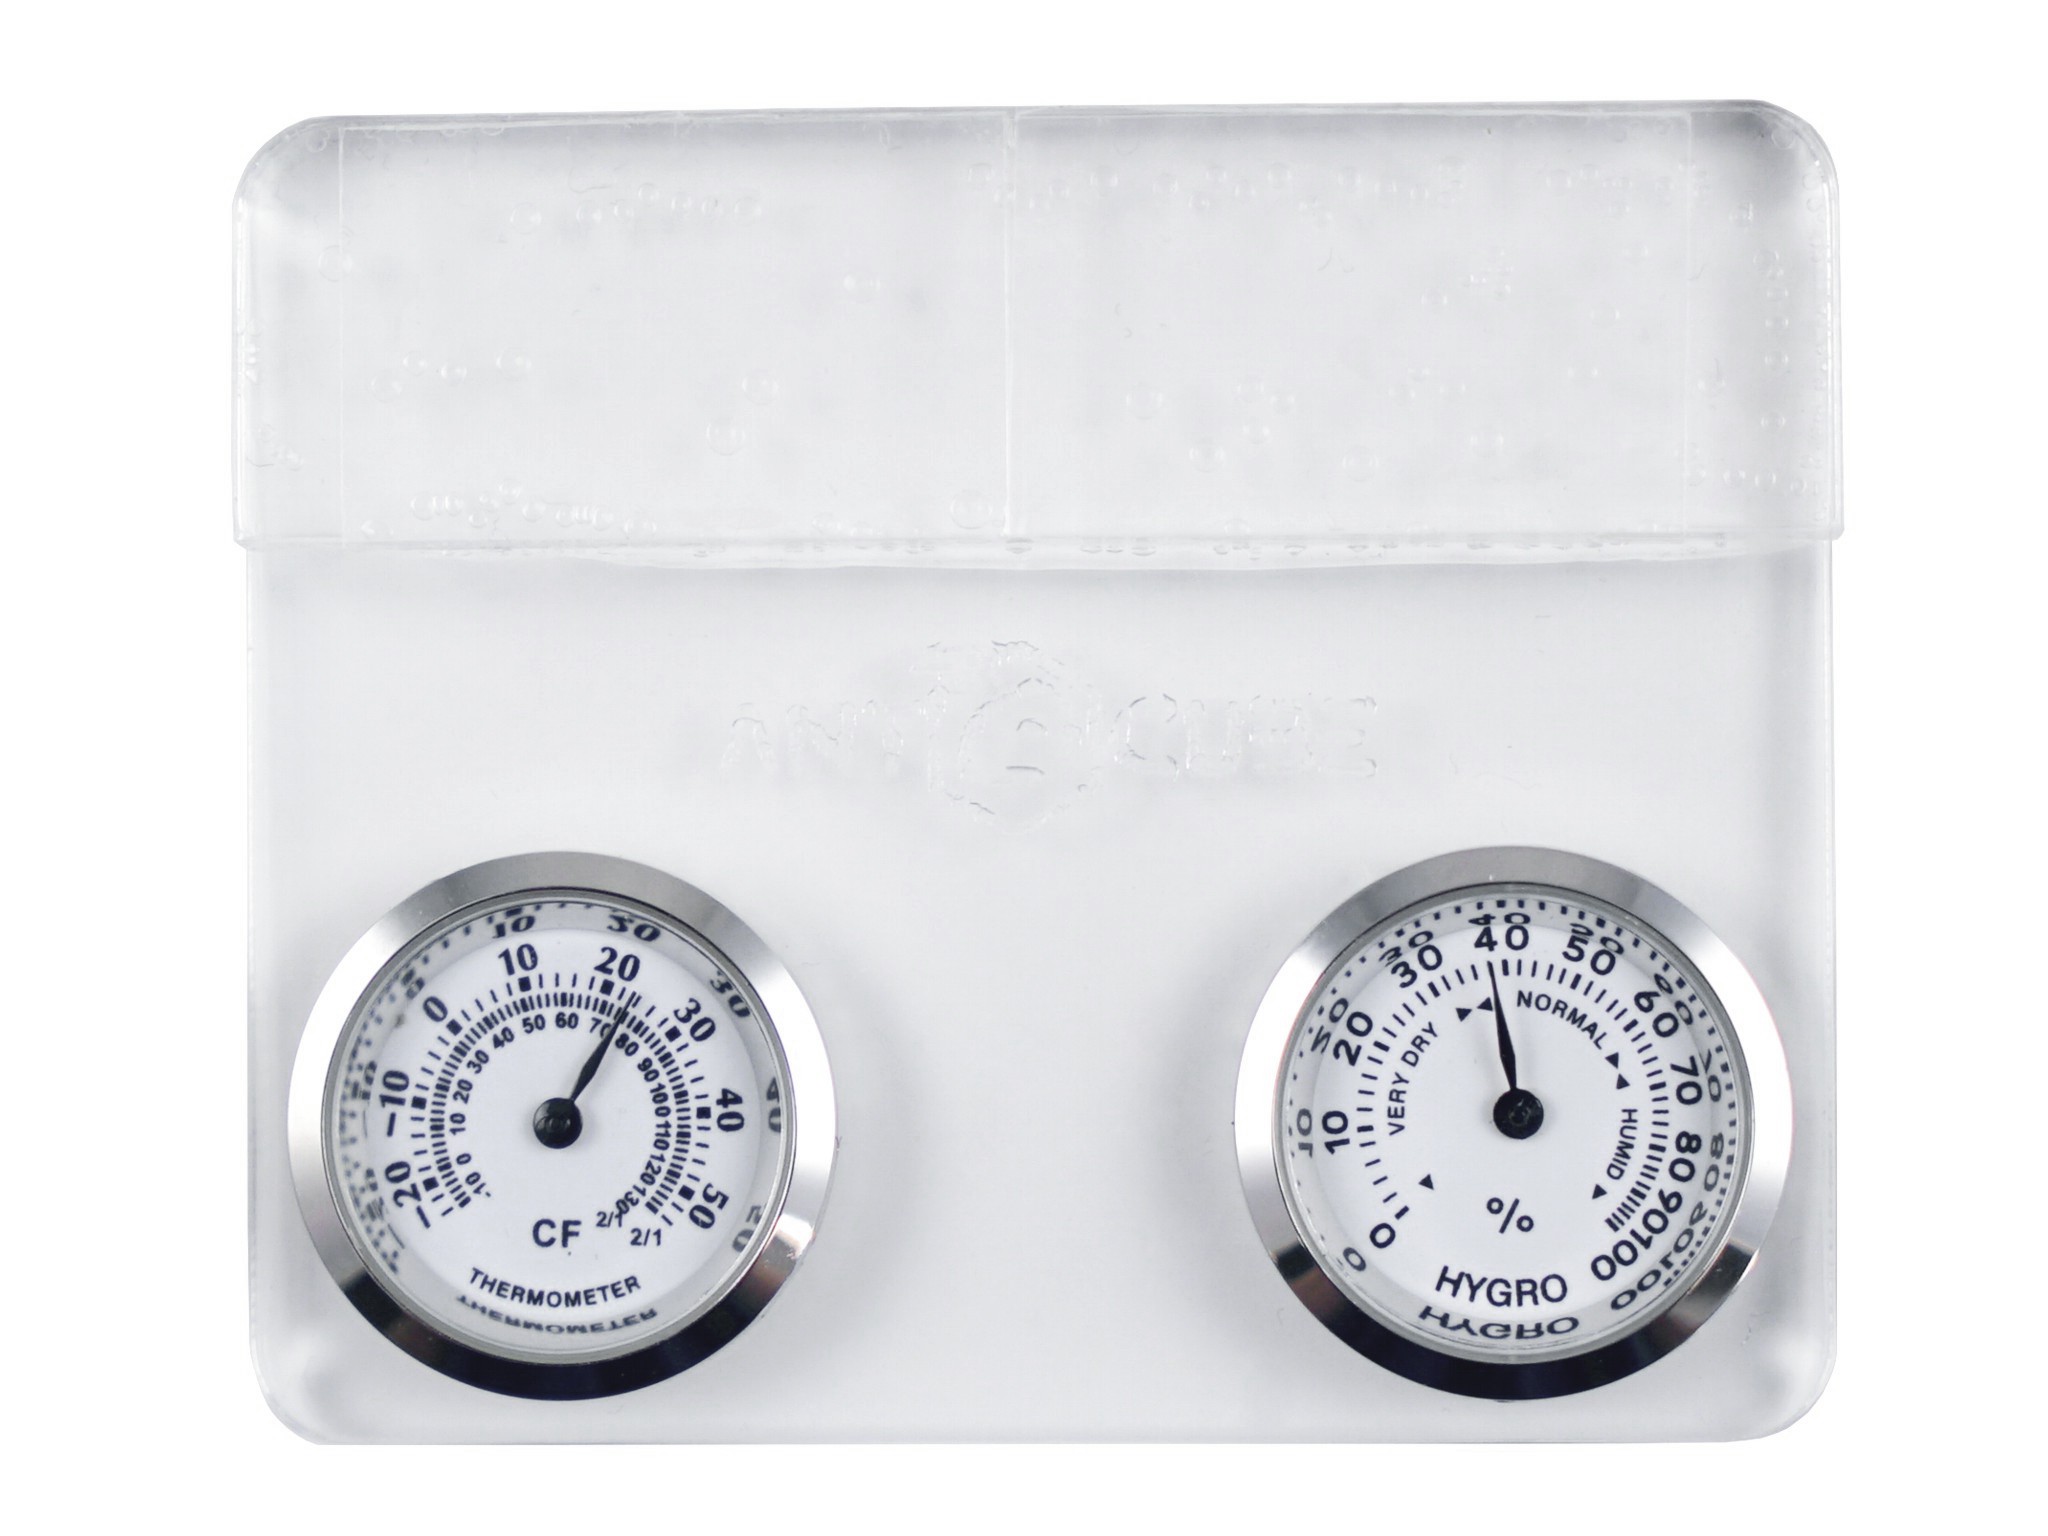 https://www.antstore.net/shop/images/product_images/original_images/Mini%20Thermo-%20Hygrometer%20analog%20-%20Display%20-%20Front1.jpg